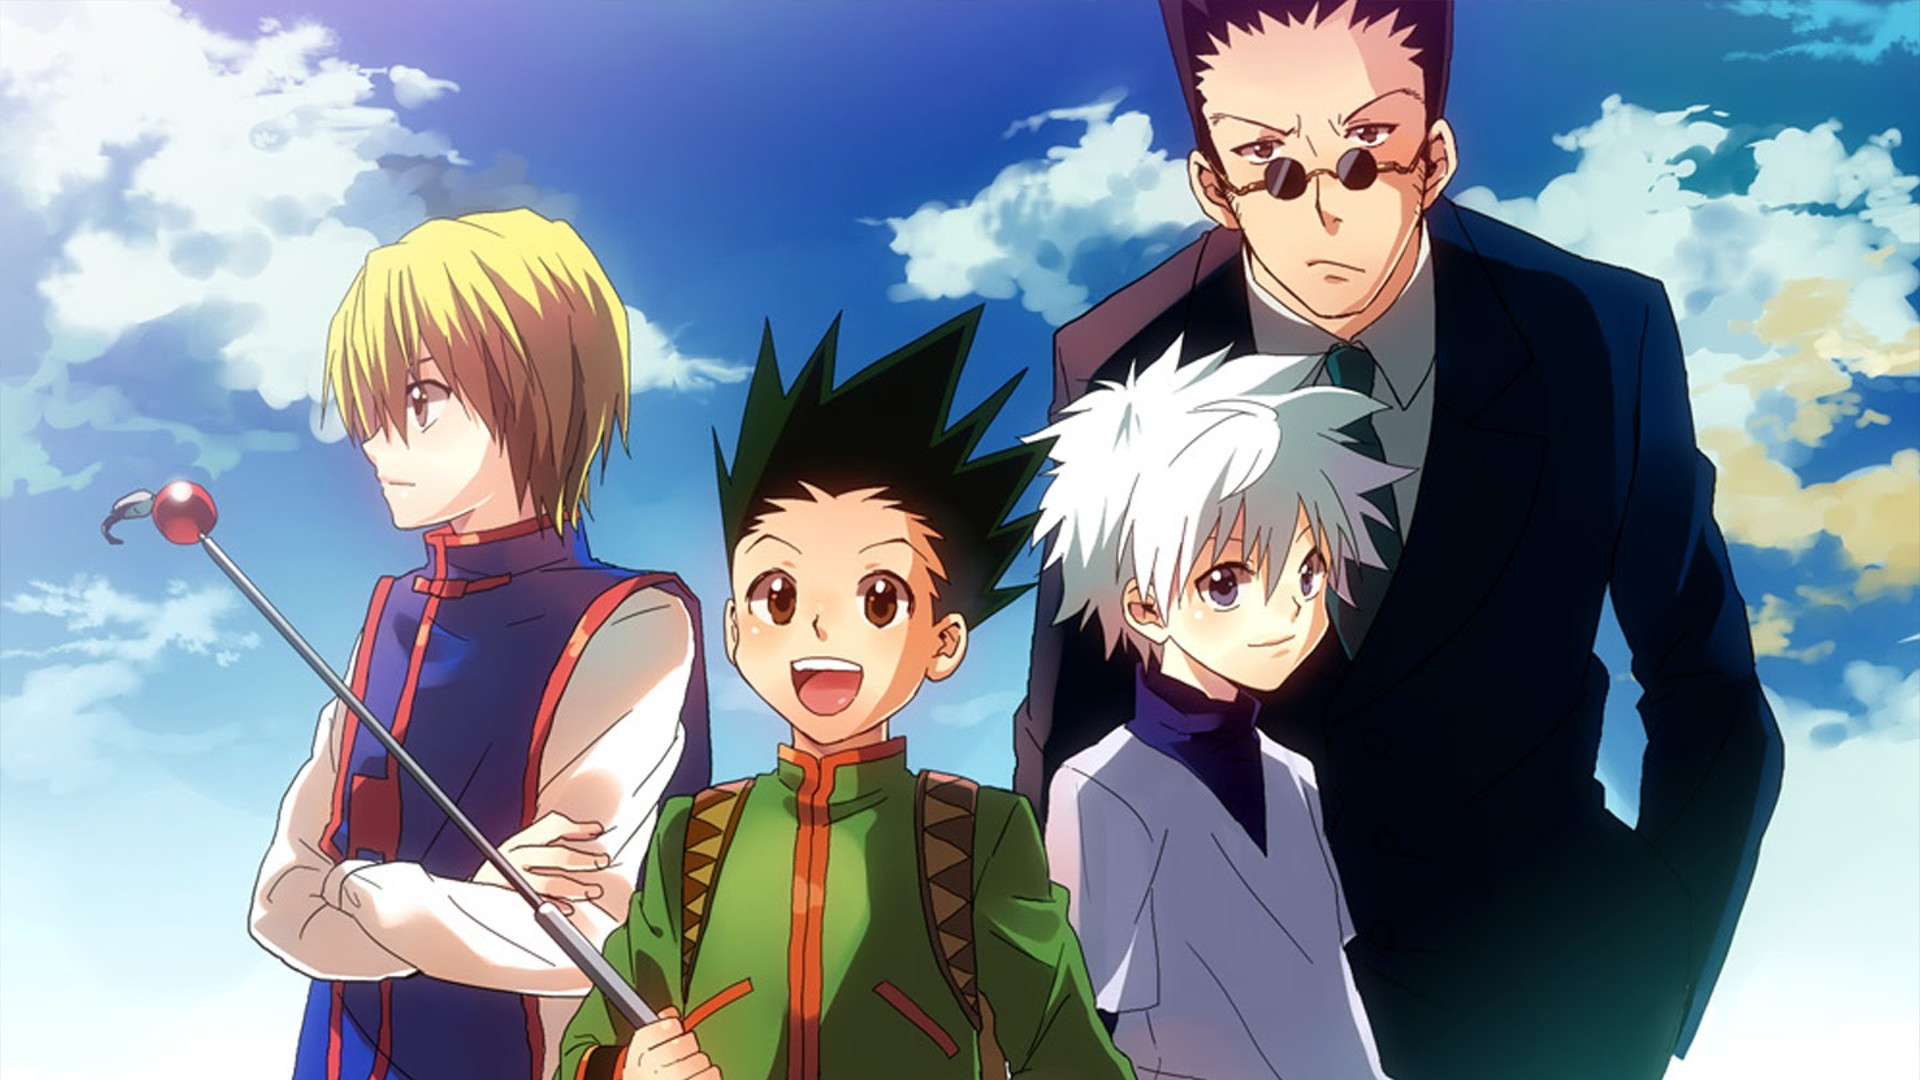 1920x1080 Backgrounds In High Quality: Hunter X Hunter Wallpapers by Horacio  Burciaga, October 25,